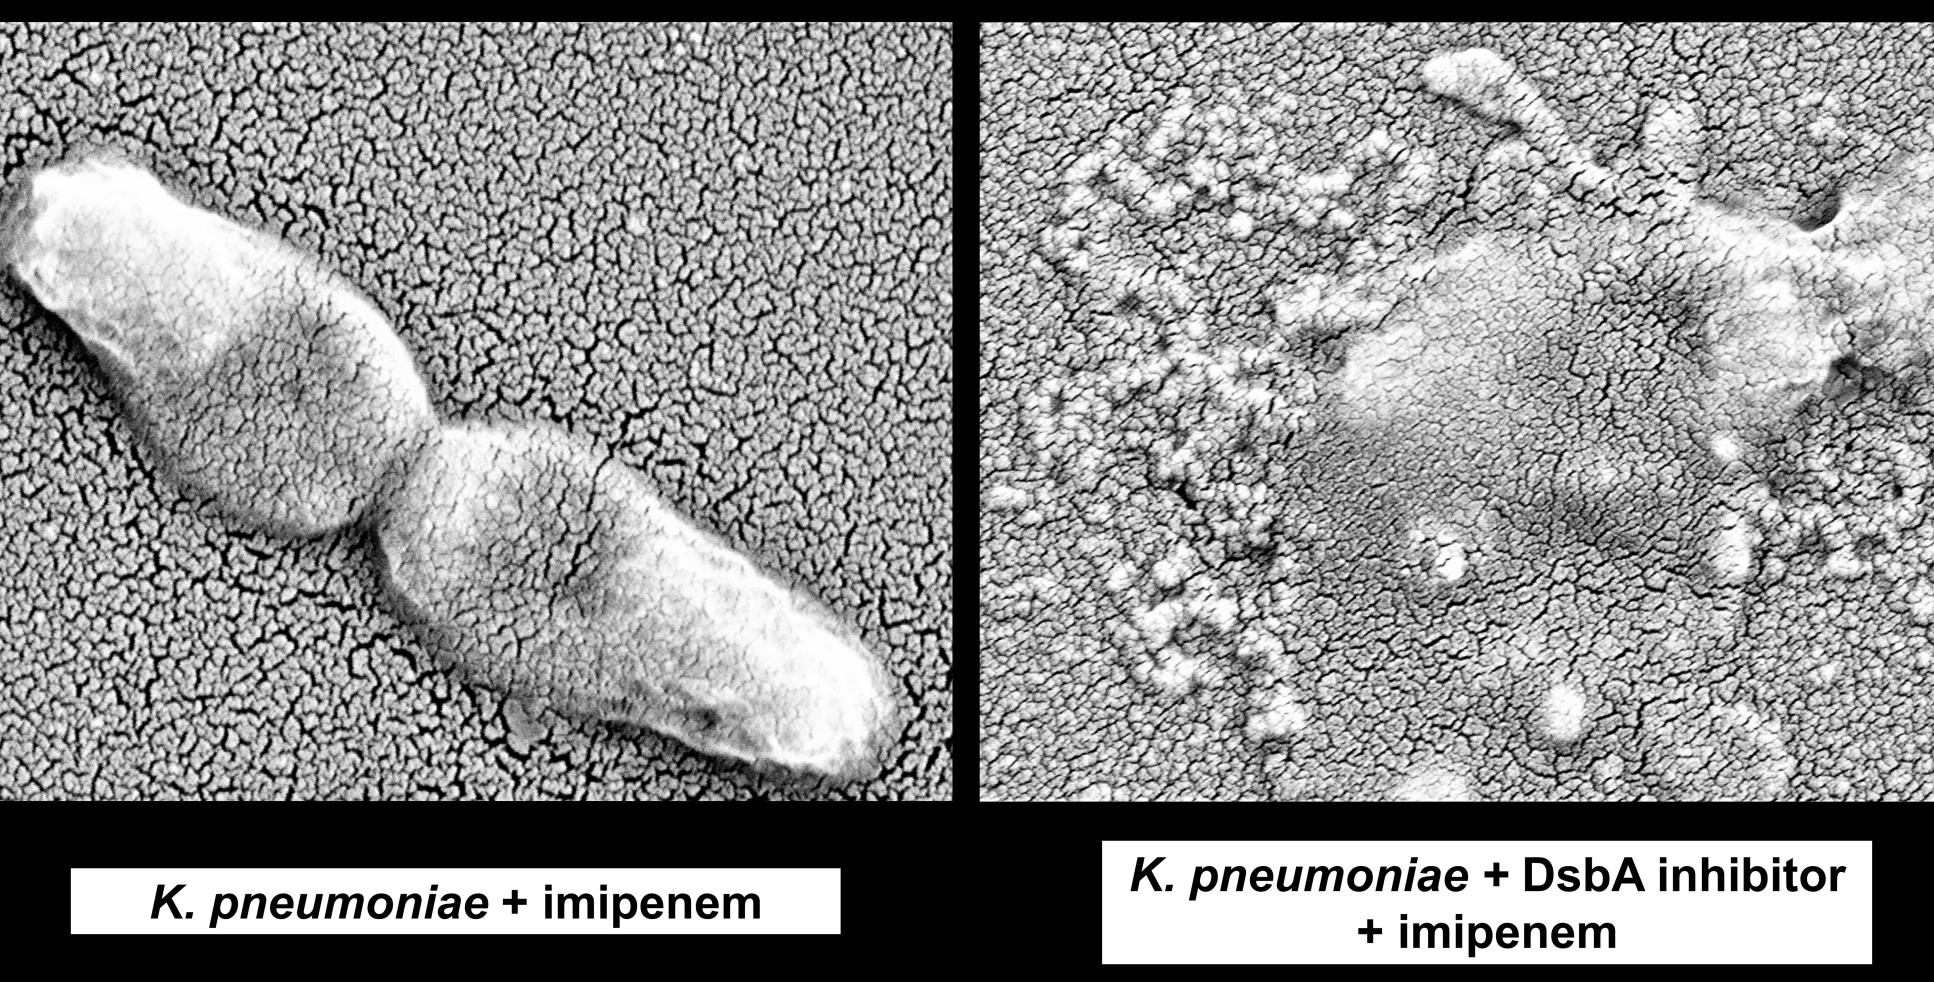 Comparison of K. pneumoniae treated with antibiotics (left) and with antibiotics and a DsbA inhibitor (right)